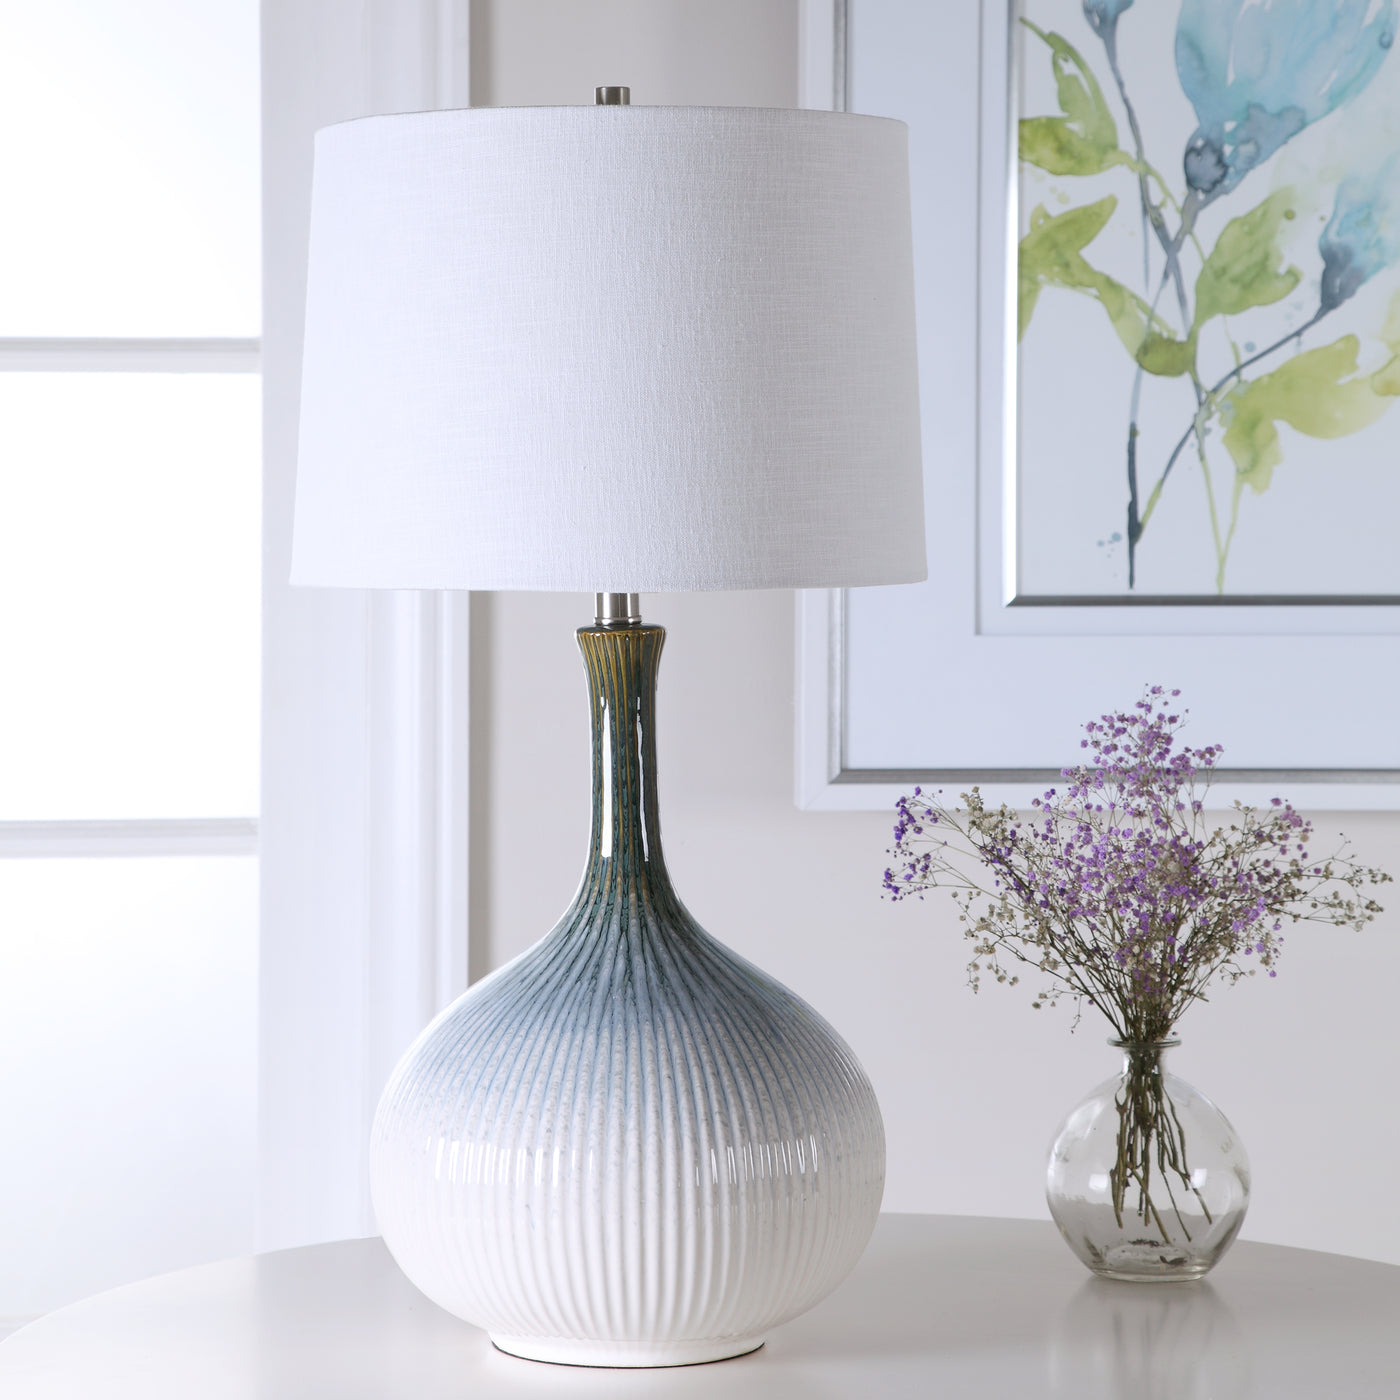 Mid-century Inspired Table Lamp Has A Fluted Ceramic Base With Noticeable Ribbed Texture And Is Finished In A Cream, Light...